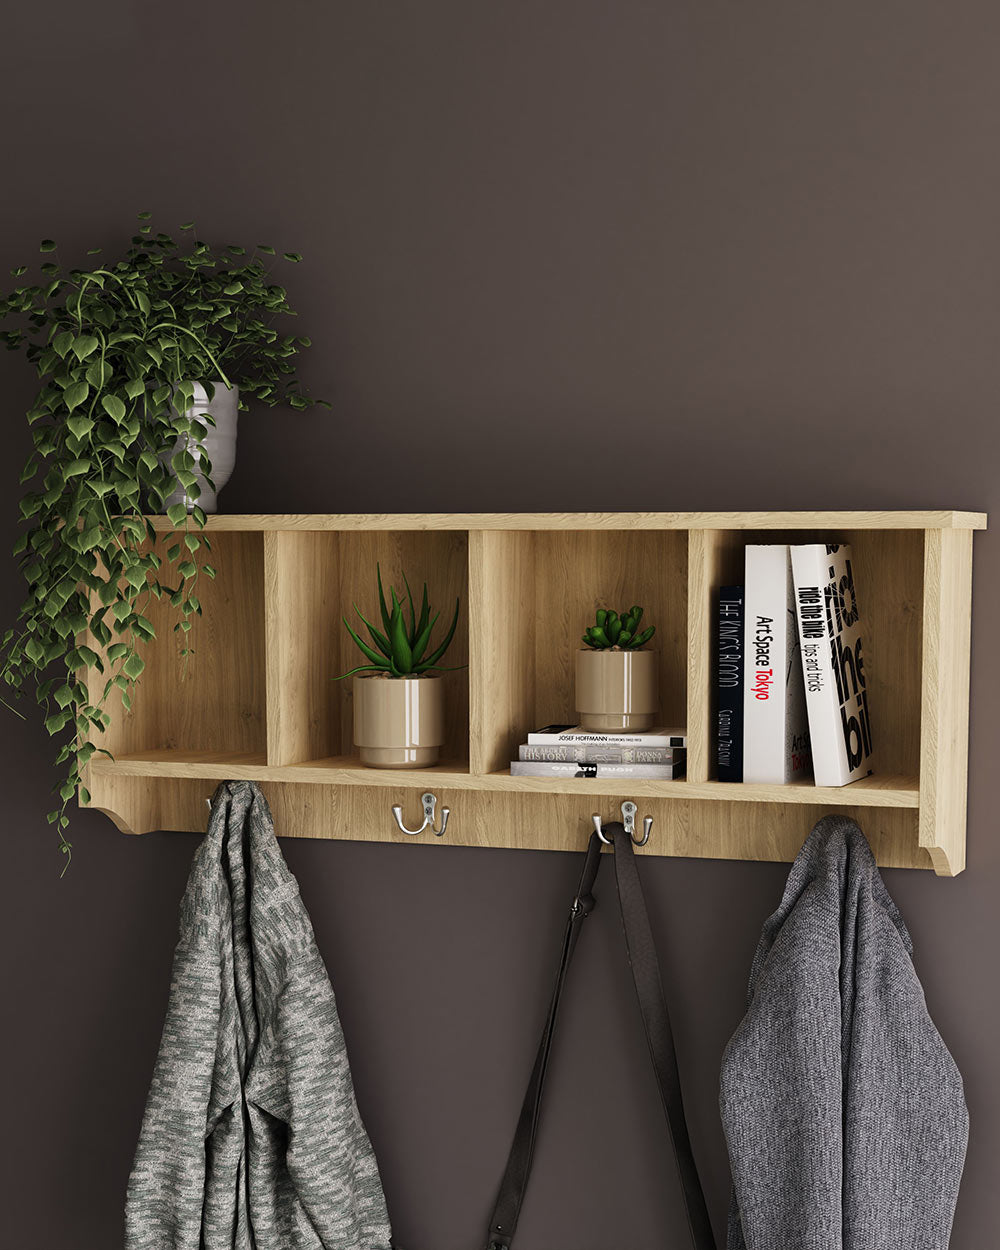 GFW Kempton wall rack oak effect in a hallway lifestyle. With decorative accessories